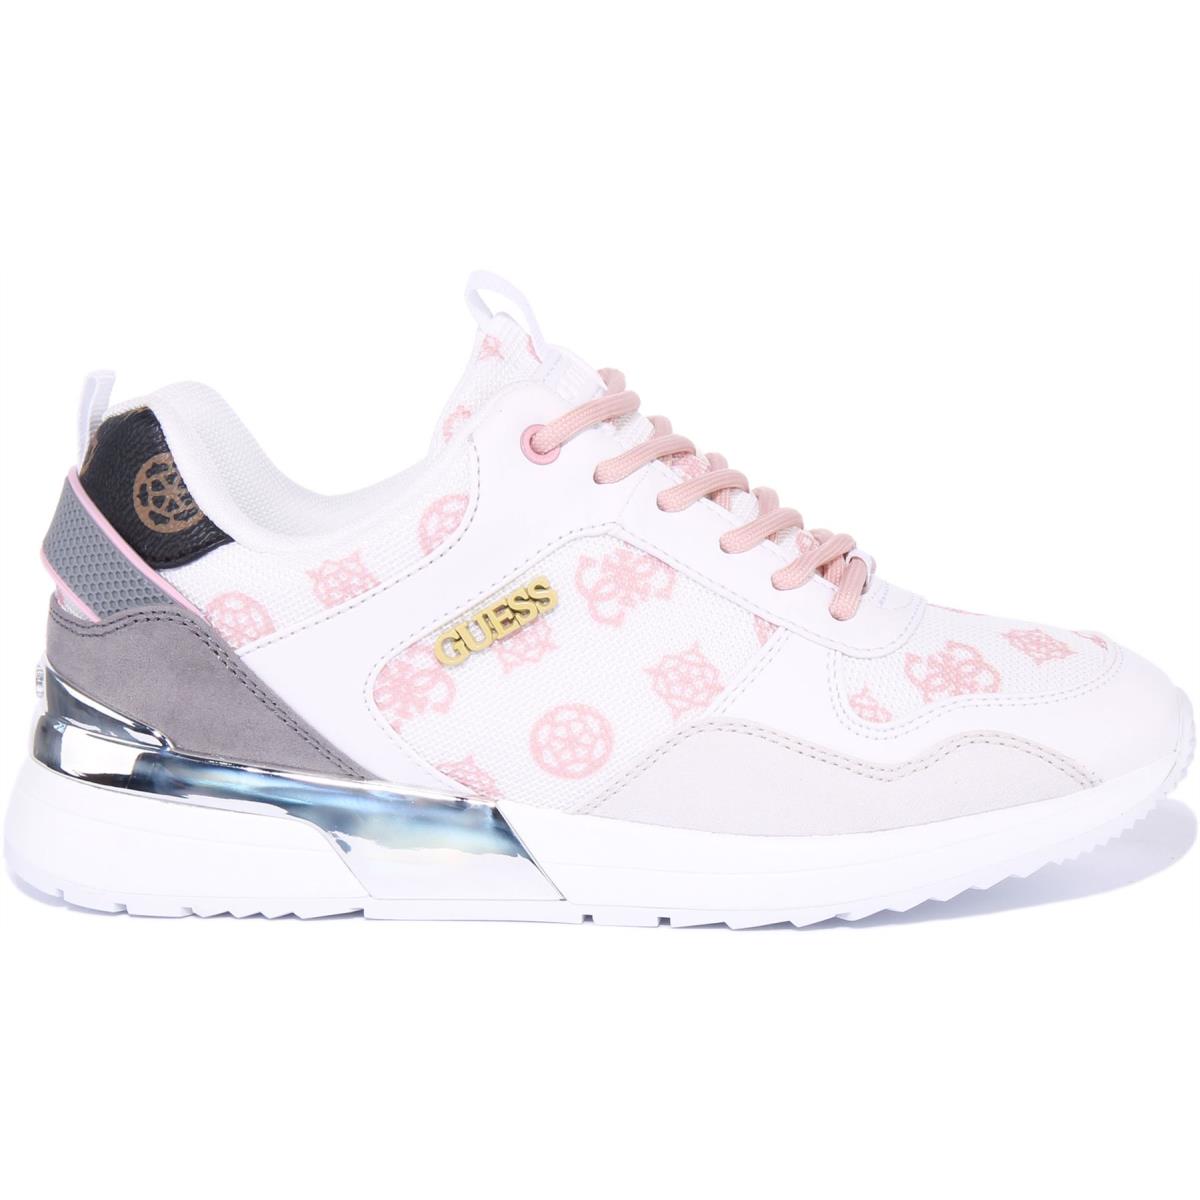 Guess Fl6Mtzfal12 Womens Runner Inspired Sneakers In White Pink Size US 5 - 11